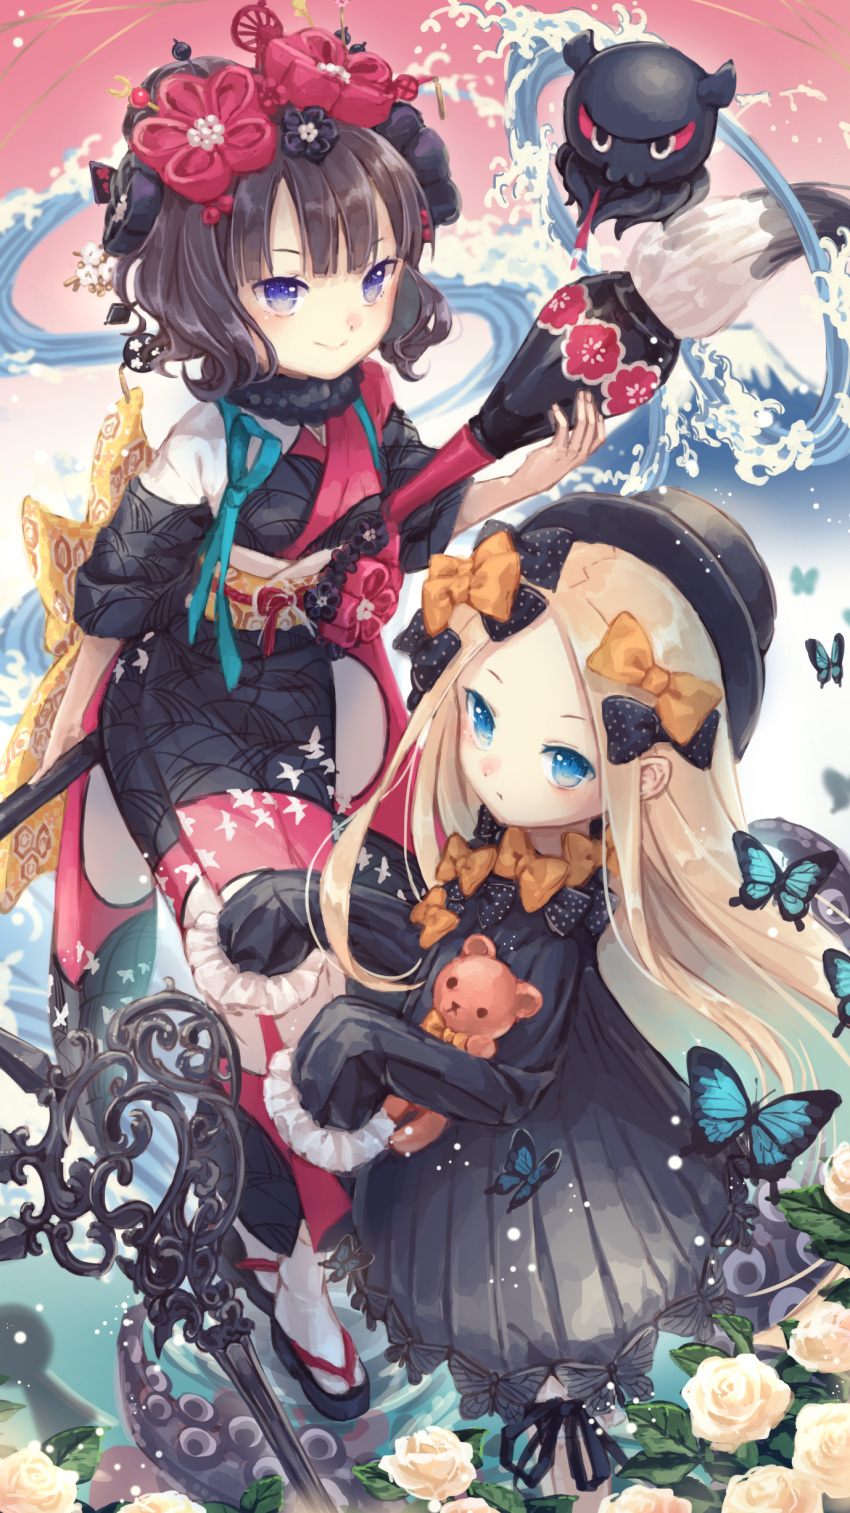 2girls abigail_williams_(fate/grand_order) absurdres animal bangs black_bow black_dress black_footwear black_hair black_hat black_kimono blonde_hair blue_eyes bow butterfly calligraphy_brush closed_mouth commentary_request dress fate/grand_order fate_(series) flower hair_bow hat highres holding_paintbrush japanese_clothes katsushika_hokusai_(fate/grand_order) kimono long_hair long_sleeves looking_at_viewer multiple_girls object_hug octopus orange_bow oversized_object paintbrush parted_bangs polka_dot polka_dot_bow print_kimono sleeves_past_fingers sleeves_past_wrists smile socks stuffed_animal stuffed_toy suction_cups tabi teddy_bear tentacle v-shaped_eyebrows very_long_hair violet_eyes water waves white_flower white_footwear yumeichigo_alice zouri